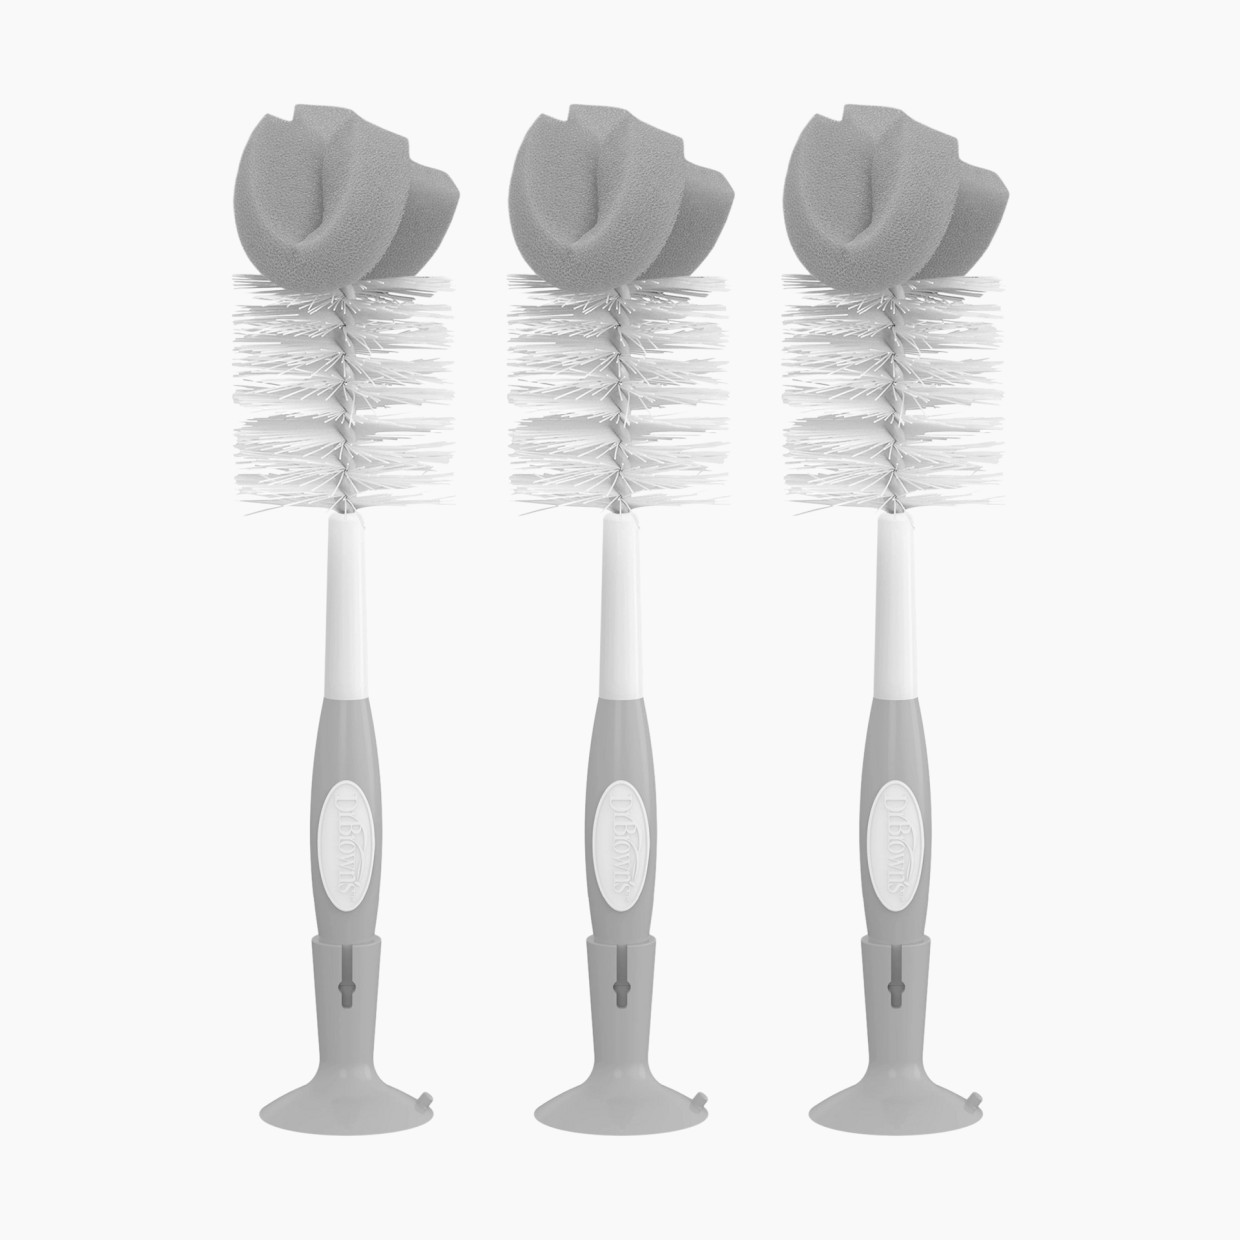 Dr. Brown's Reusable Sponge Baby Bottle Cleaning Brush Set with Suction Cup Stand, Scrubber and Nipple Cleaner, 3 Pack - Grey.